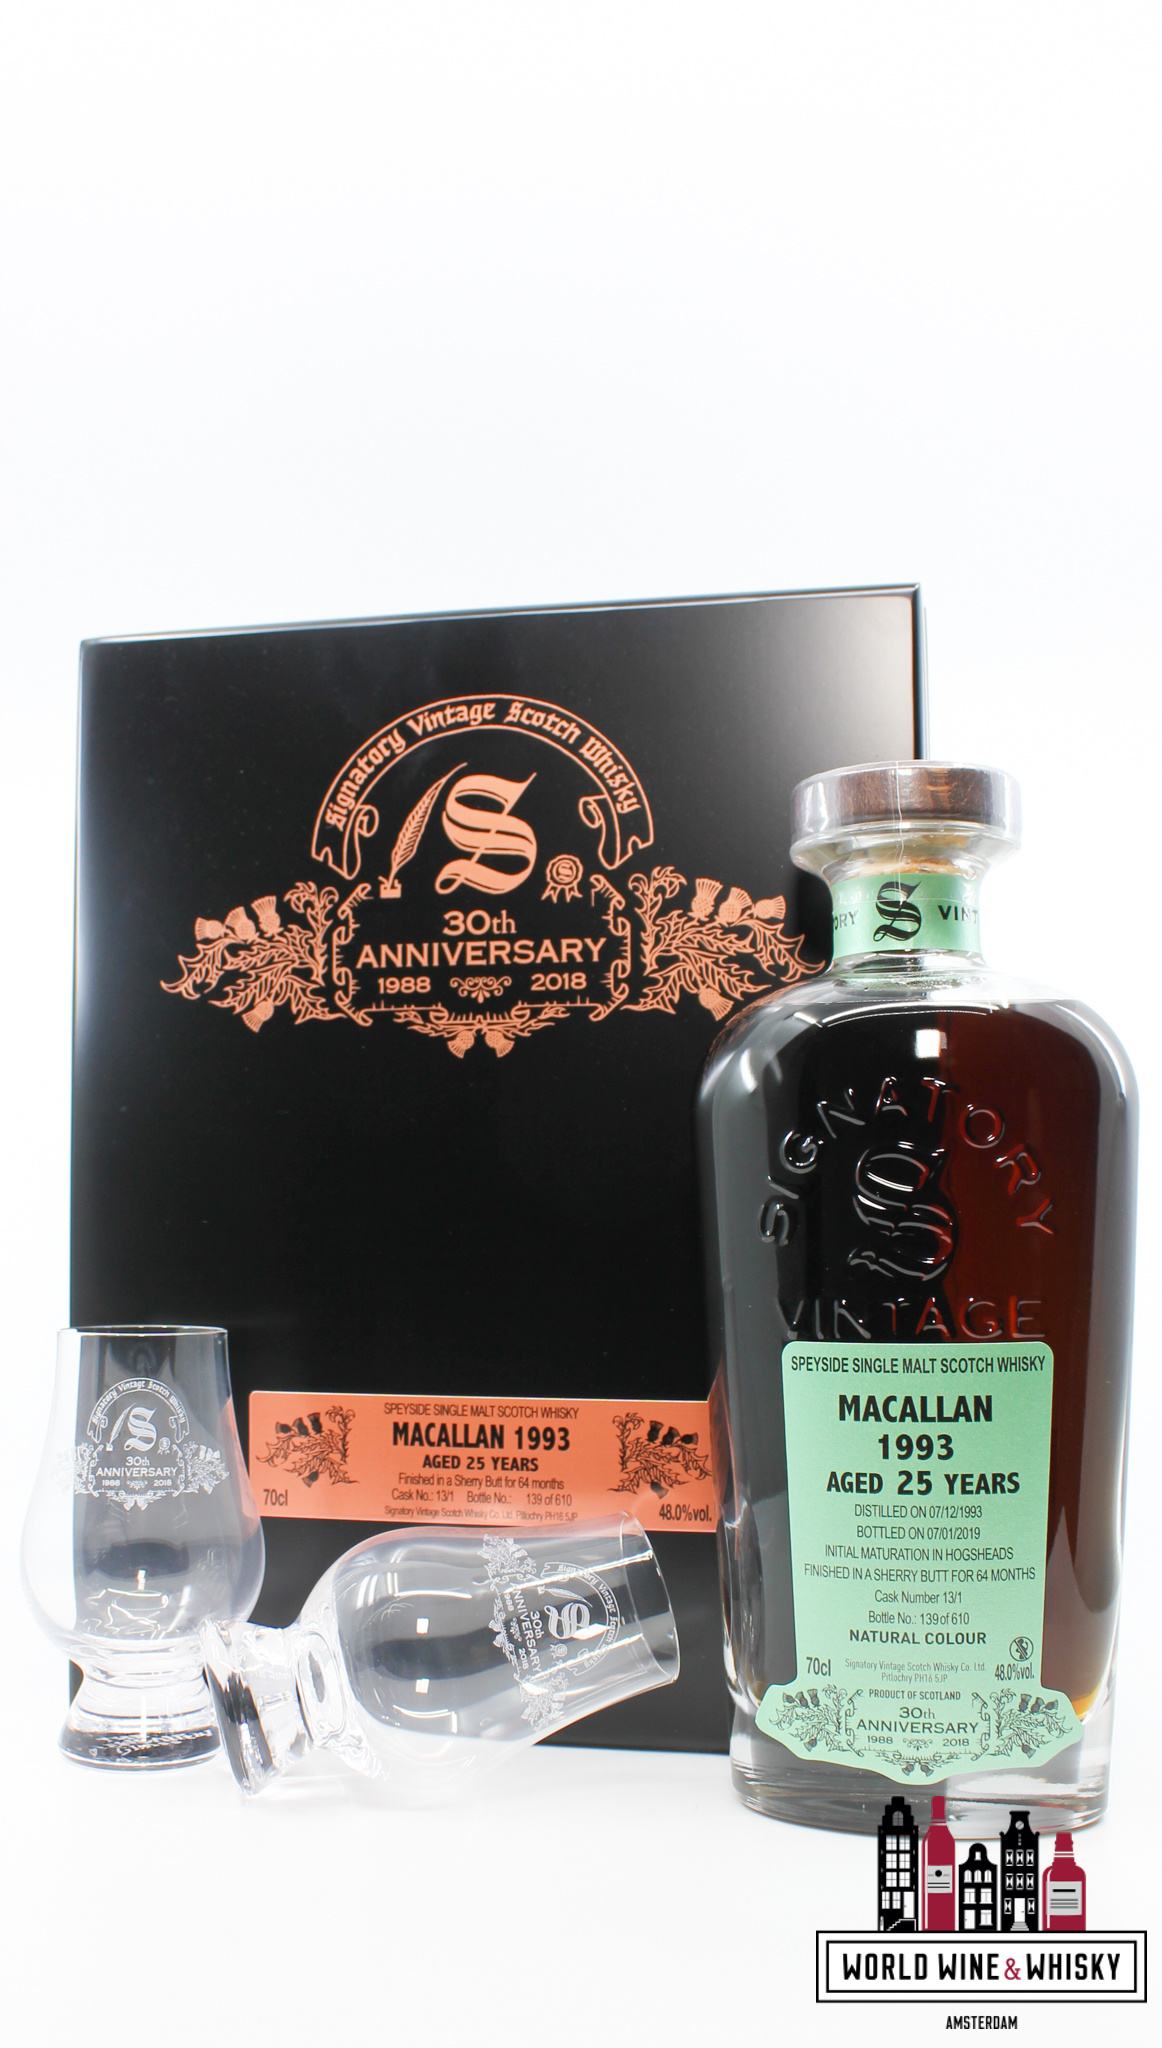 Macallan Macallan 25 Years Old 1993 2019 - 30th Anniversary - Signatory Vintage - Cask 13/1 48% (1 of 610)